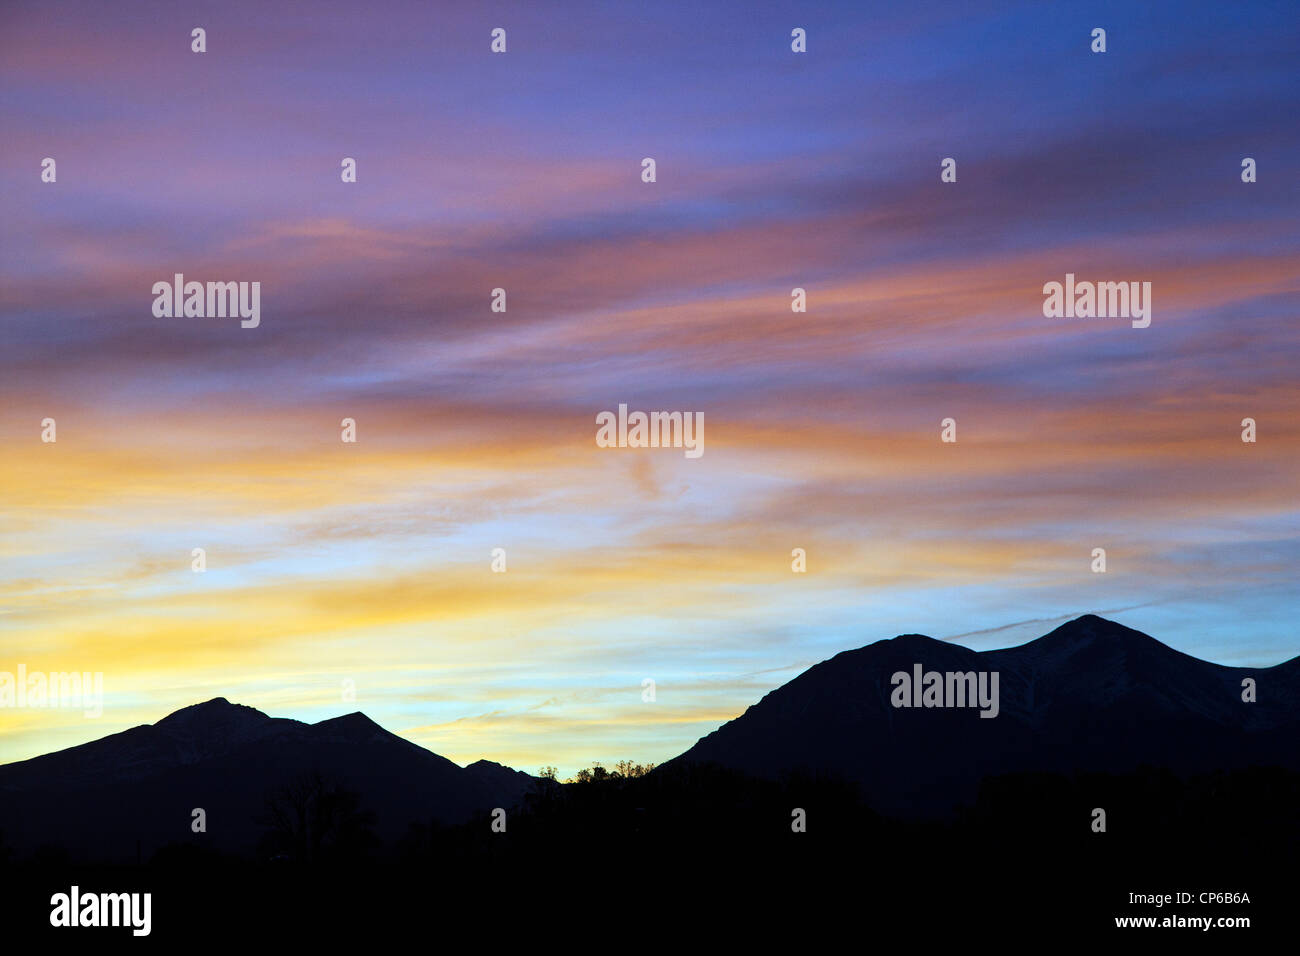 Sunset dusk view from residential neighborhood in Salida, Colorado, USA Stock Photo